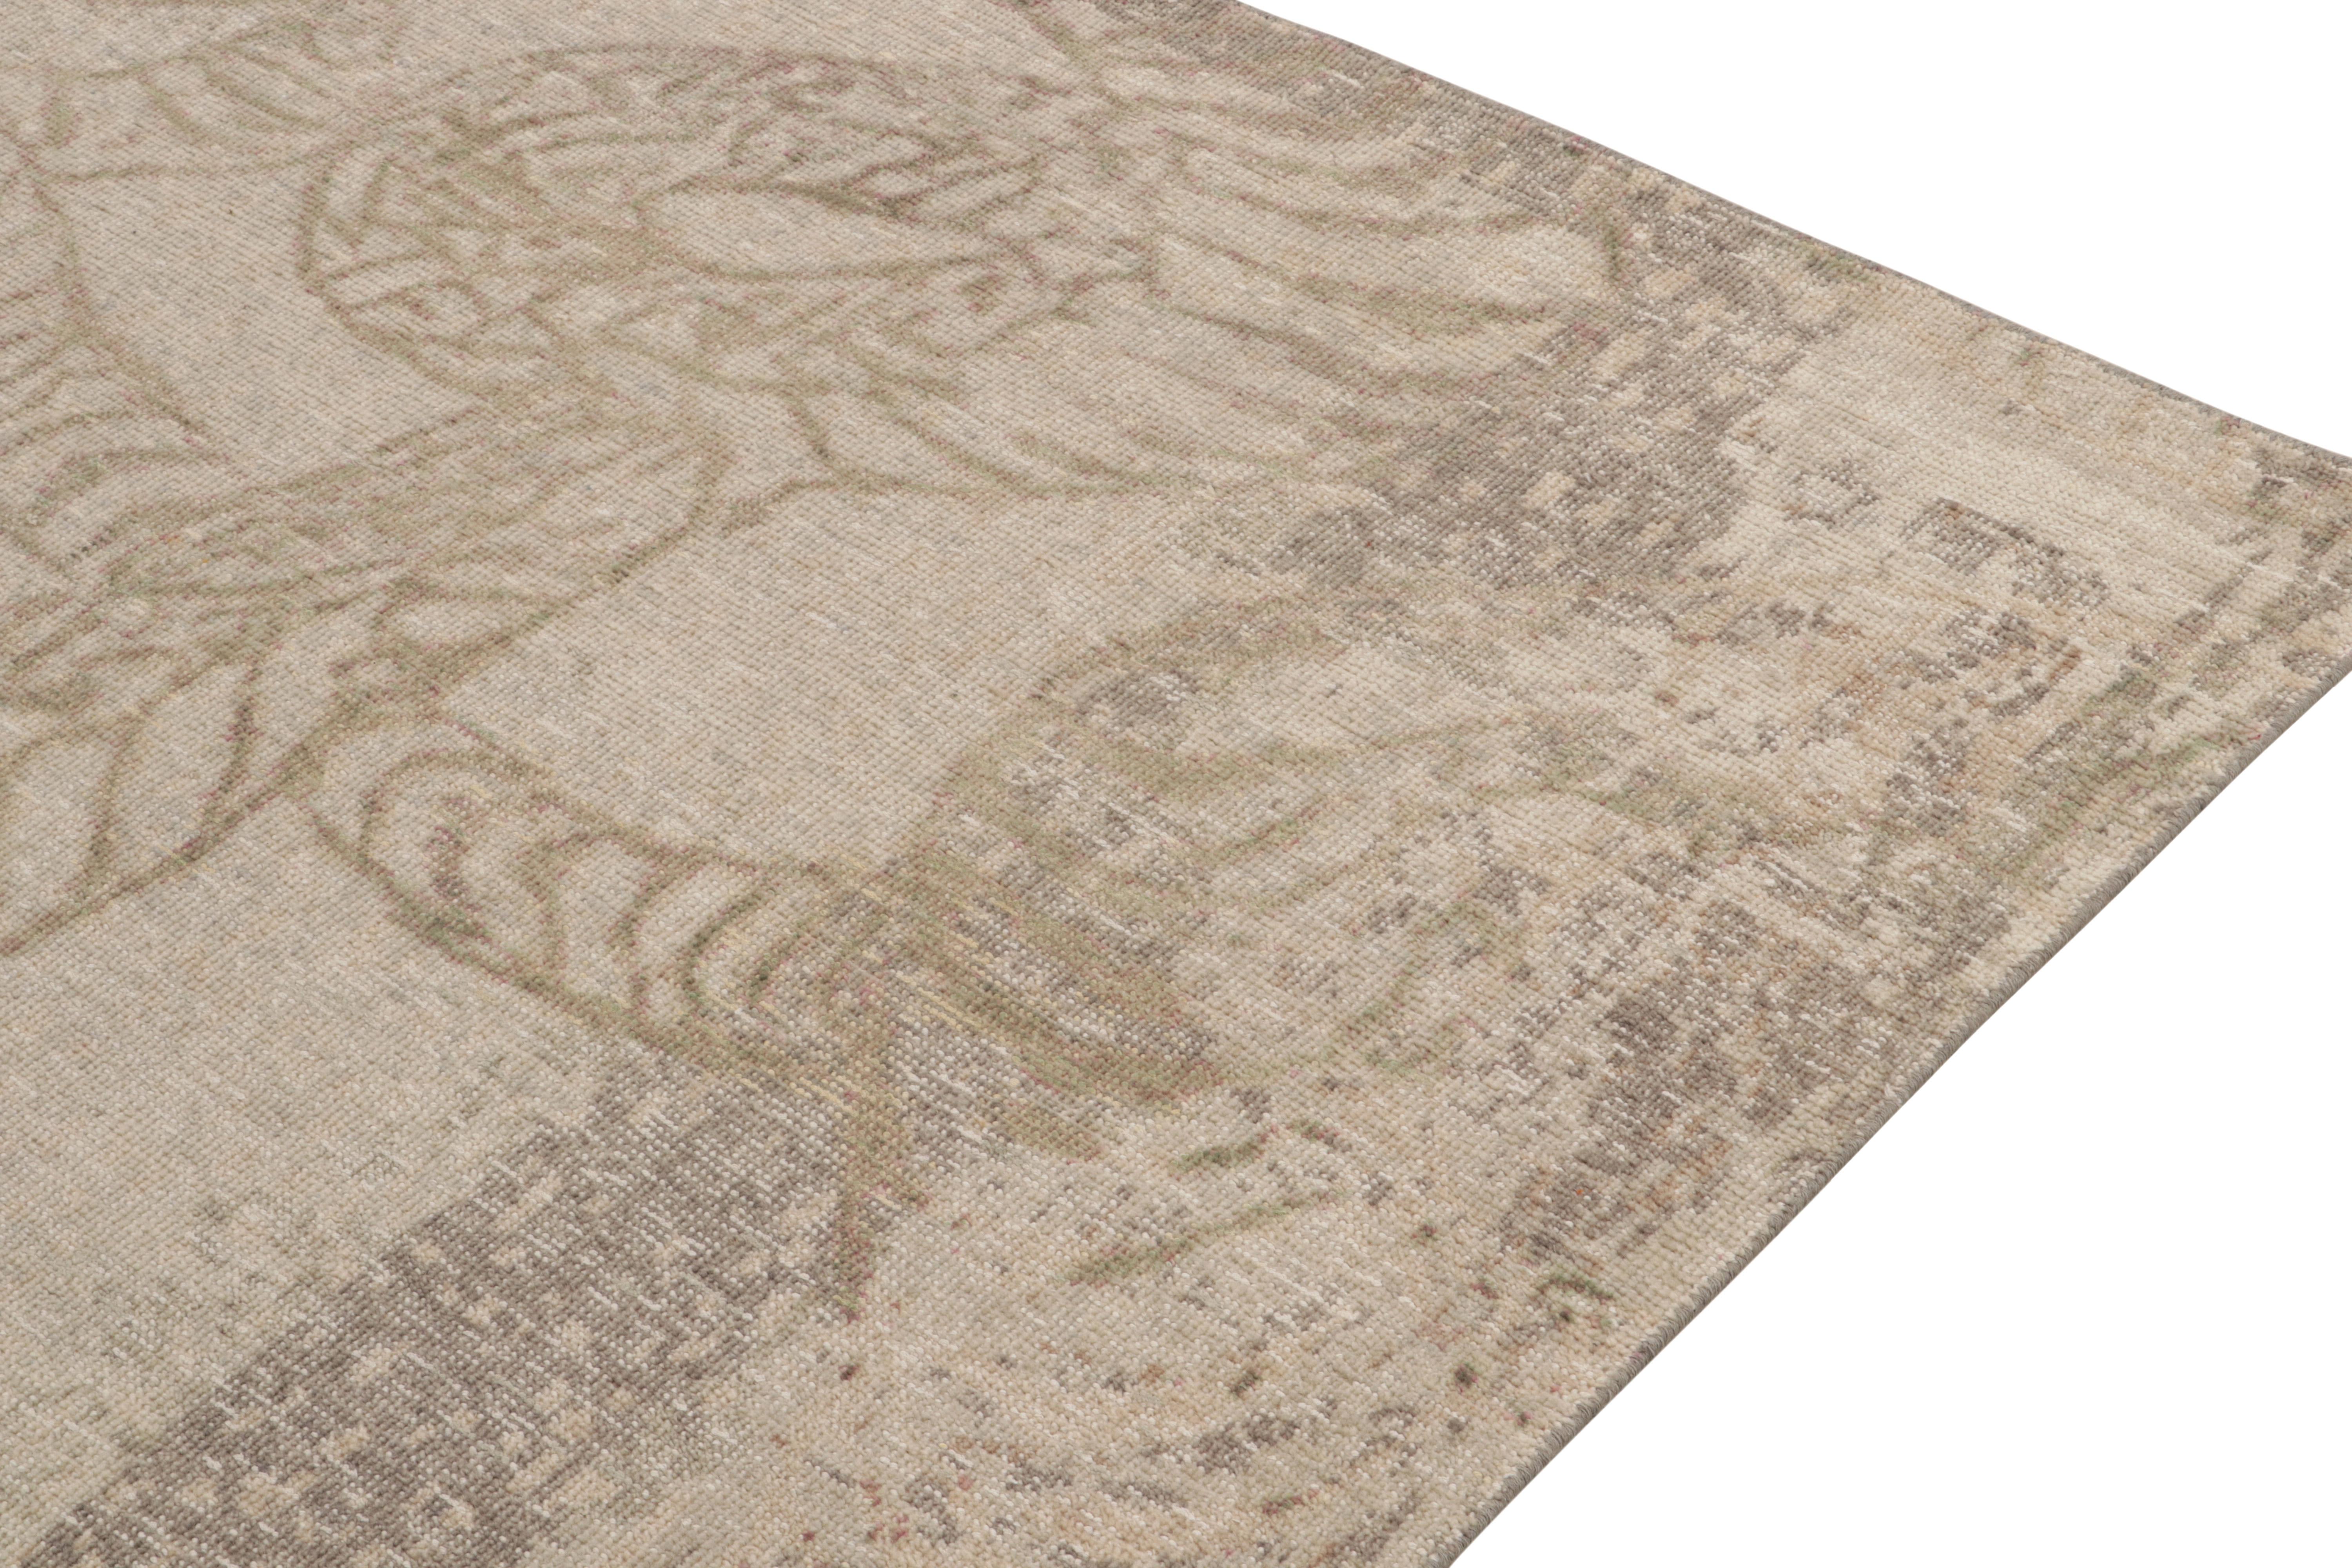 Indian Rug & Kilim's Distressed Style Abstract Rug in Beige-Brown & Gray Pattern For Sale